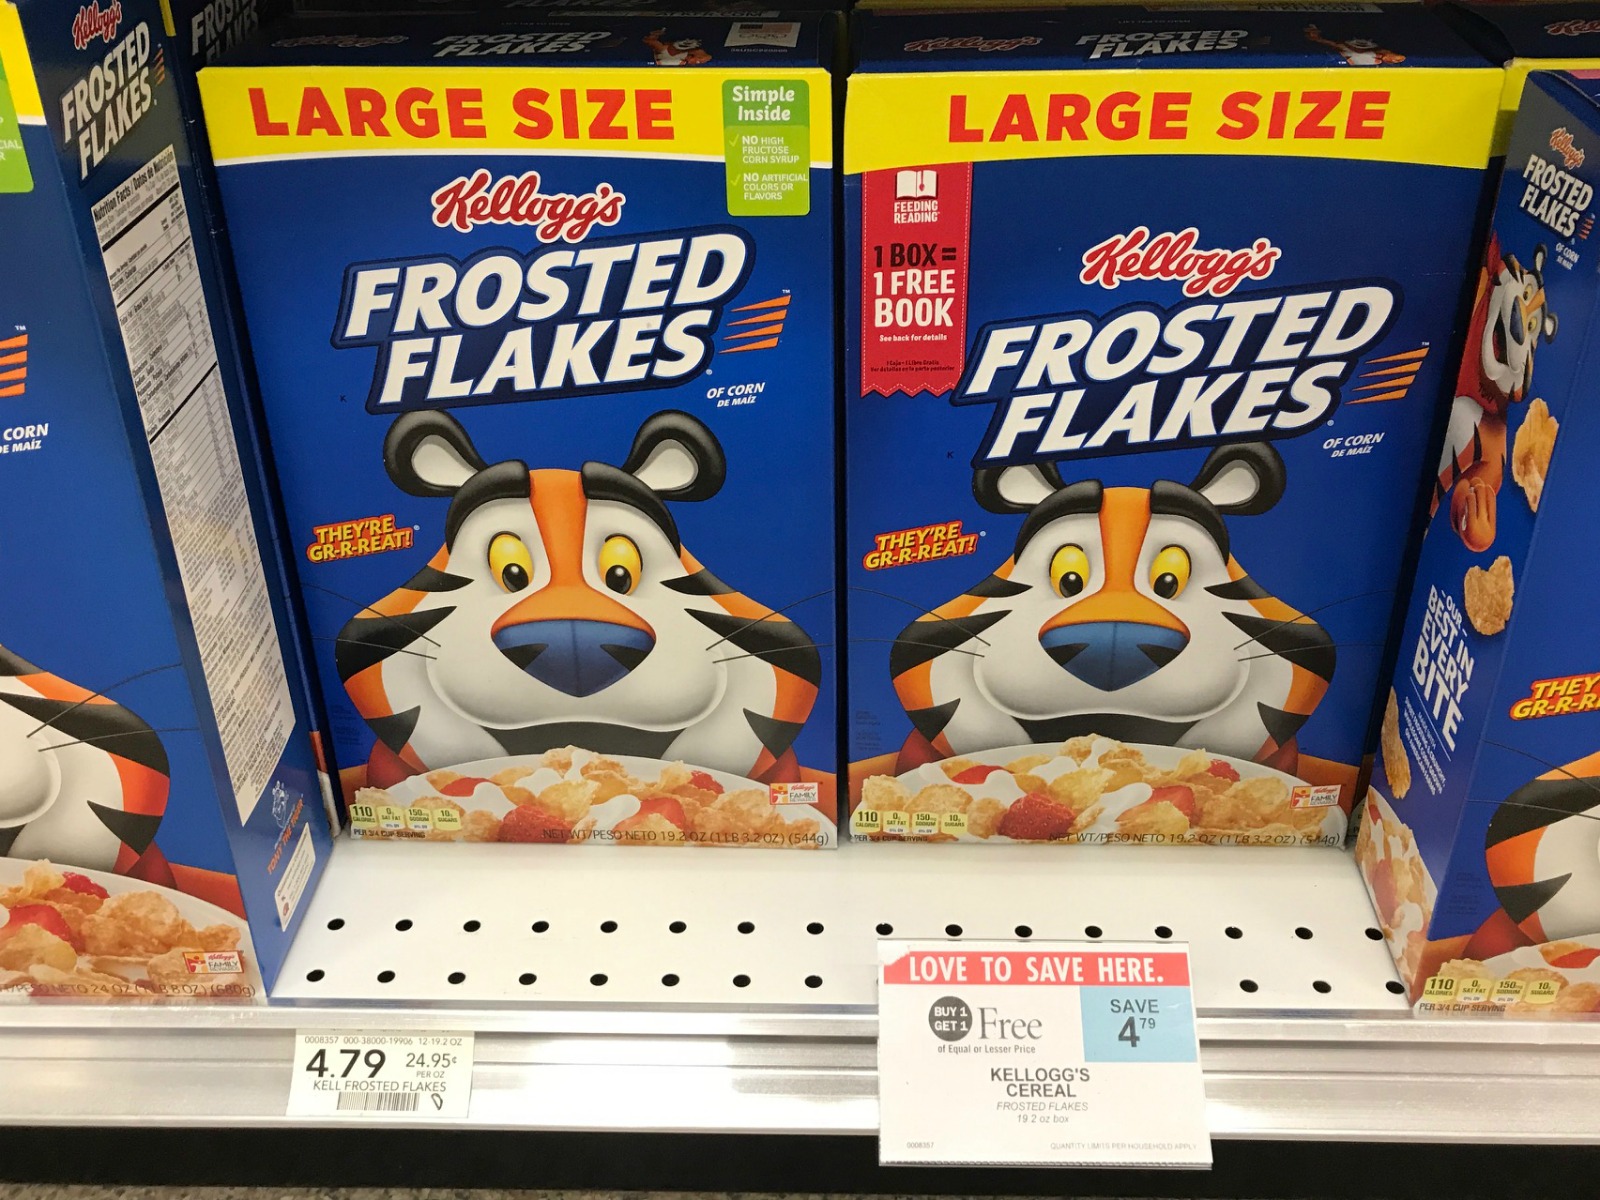 Stock Up On Frosted Flakes And Froot Loops During The BOGO Sale At Publix on I Heart Publix